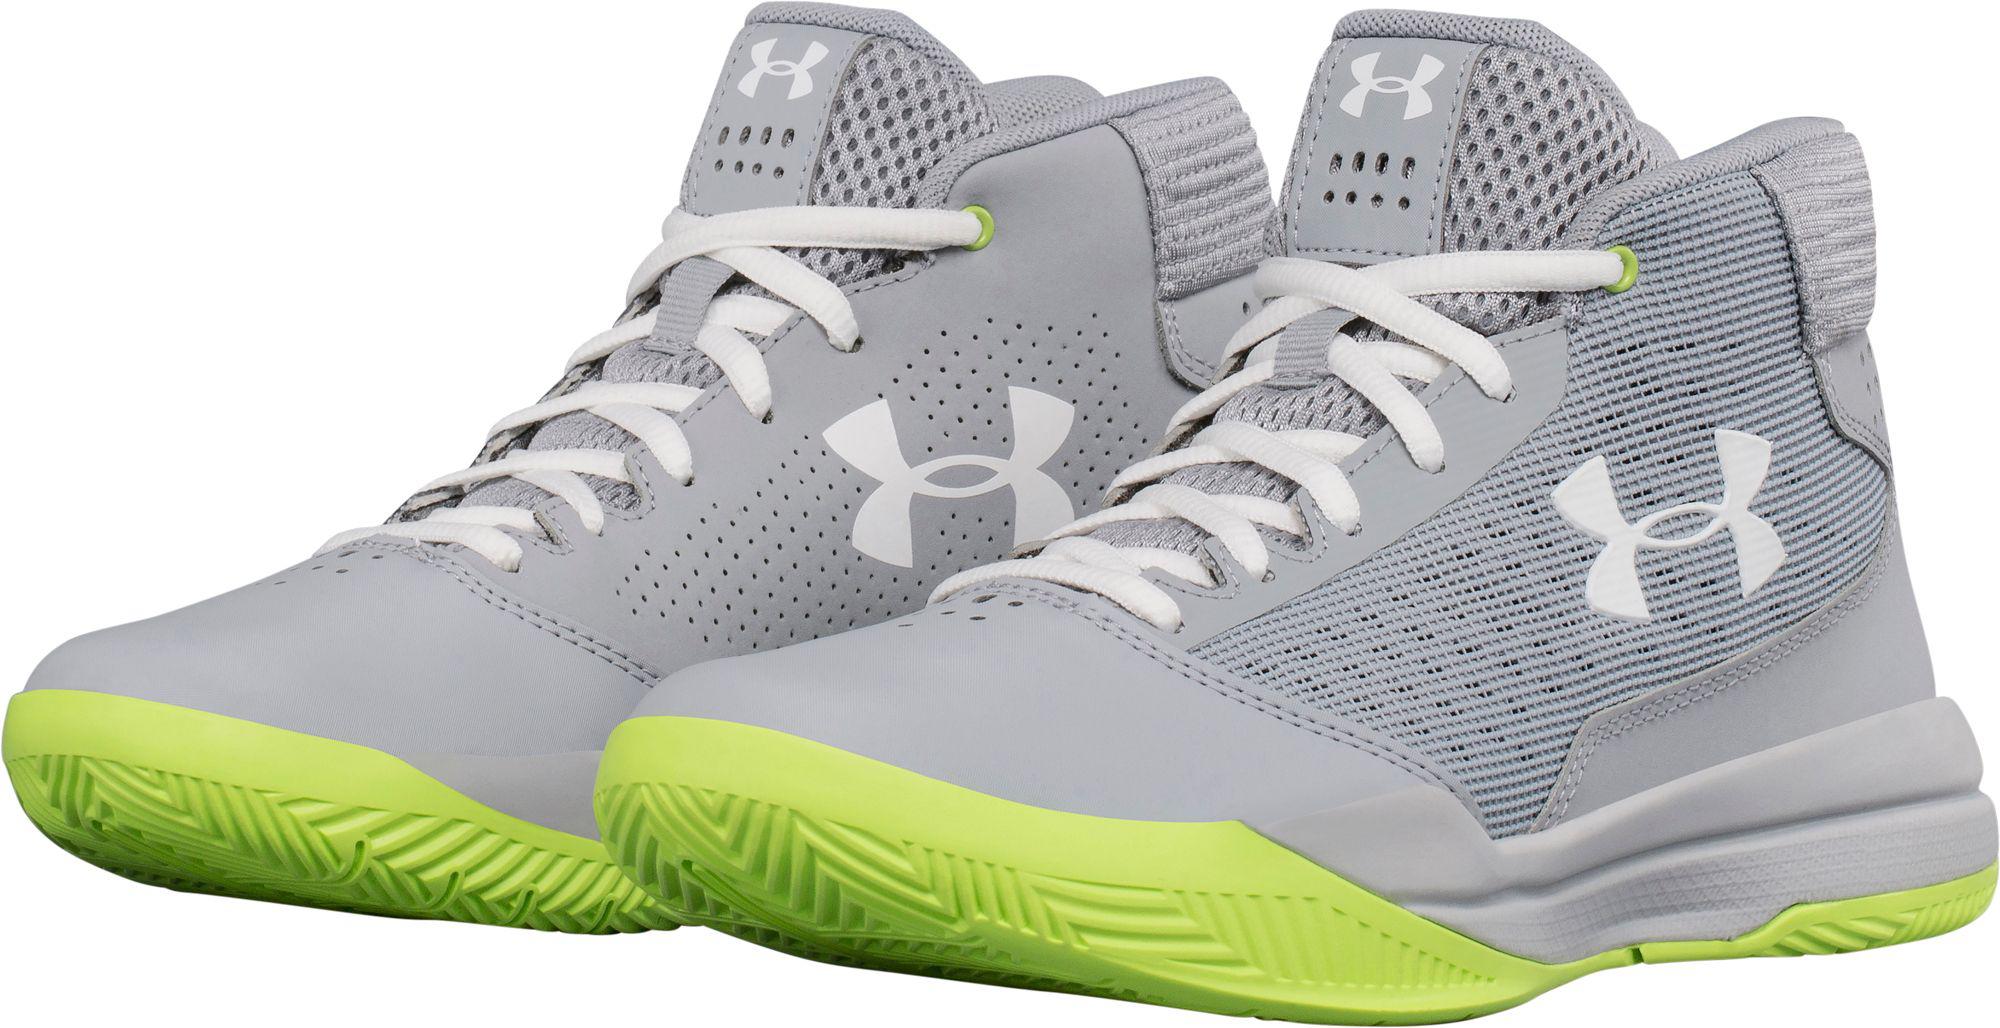 under armour jet 2017 basketball shoes